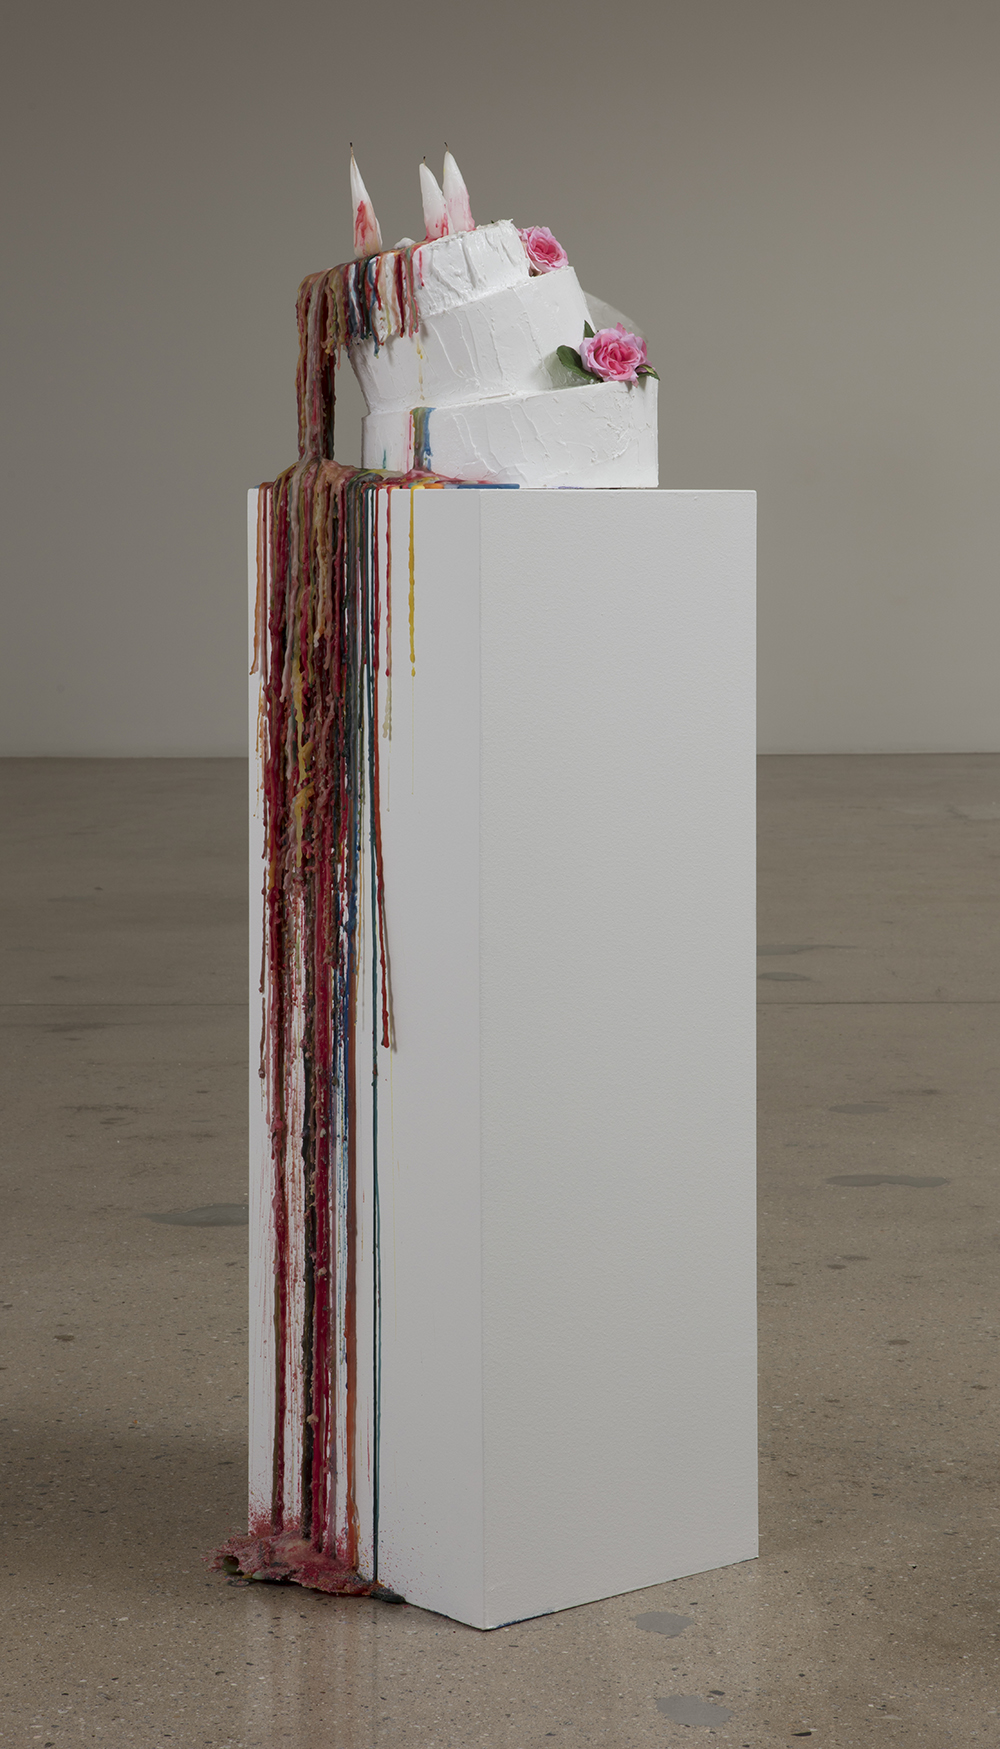 Addie Wagenknecht. <em>Waiting for Mr. Right</em>, 2017. Polystyrene, silicone, alabaster, drip candles and artificial flowers, 47 x 12 1/2 x 11 inches